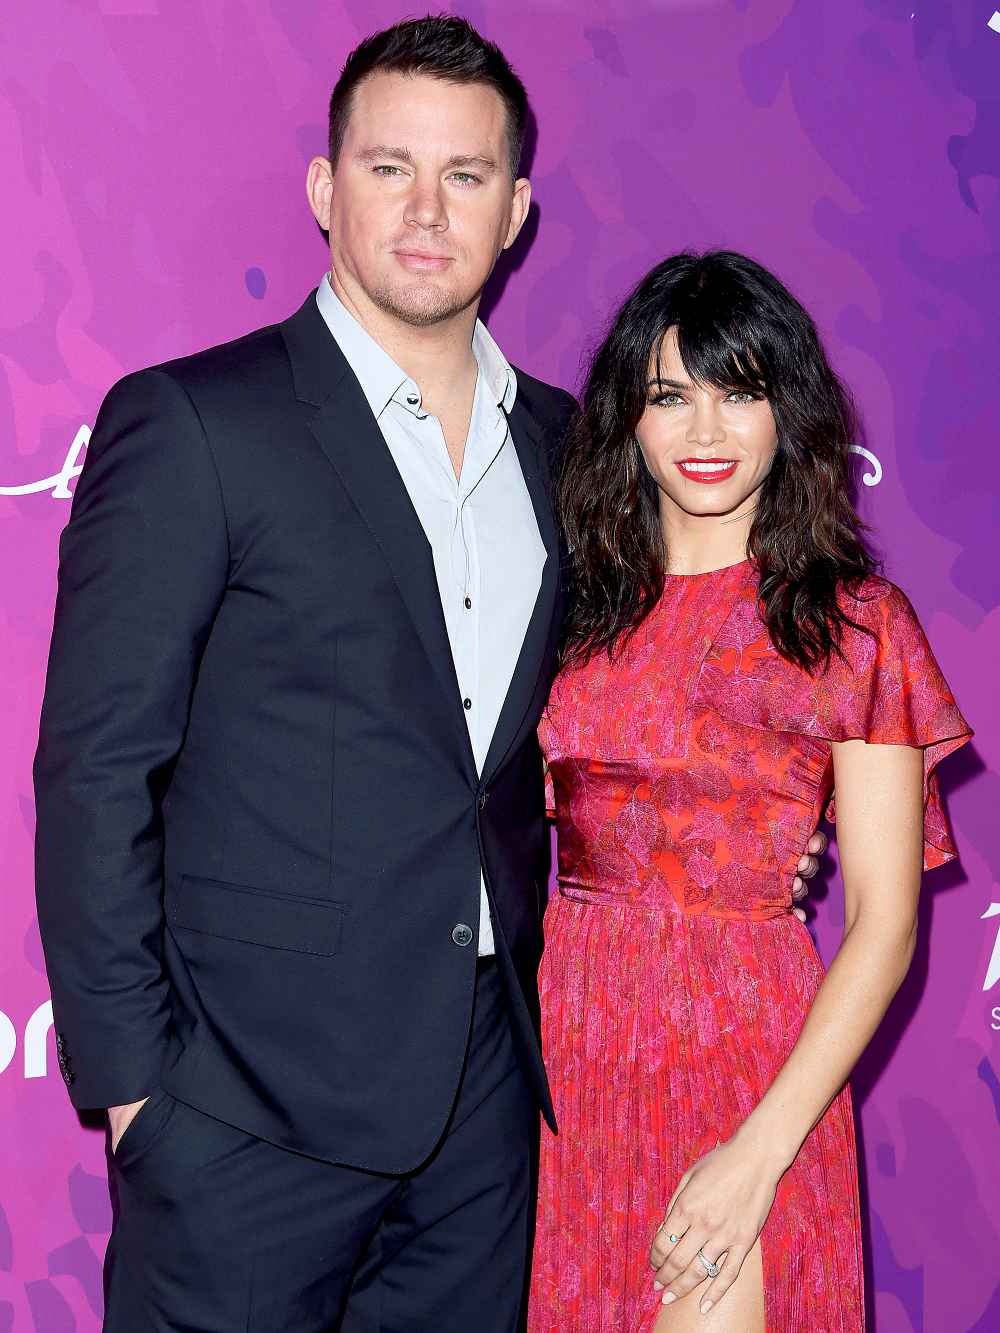 Channing Tatum and Jenna Dewan arrive at Variety and WWD 2nd Annual StyleMakers Awards at Quixote Studios West Hollywood in West Hollywood, California.